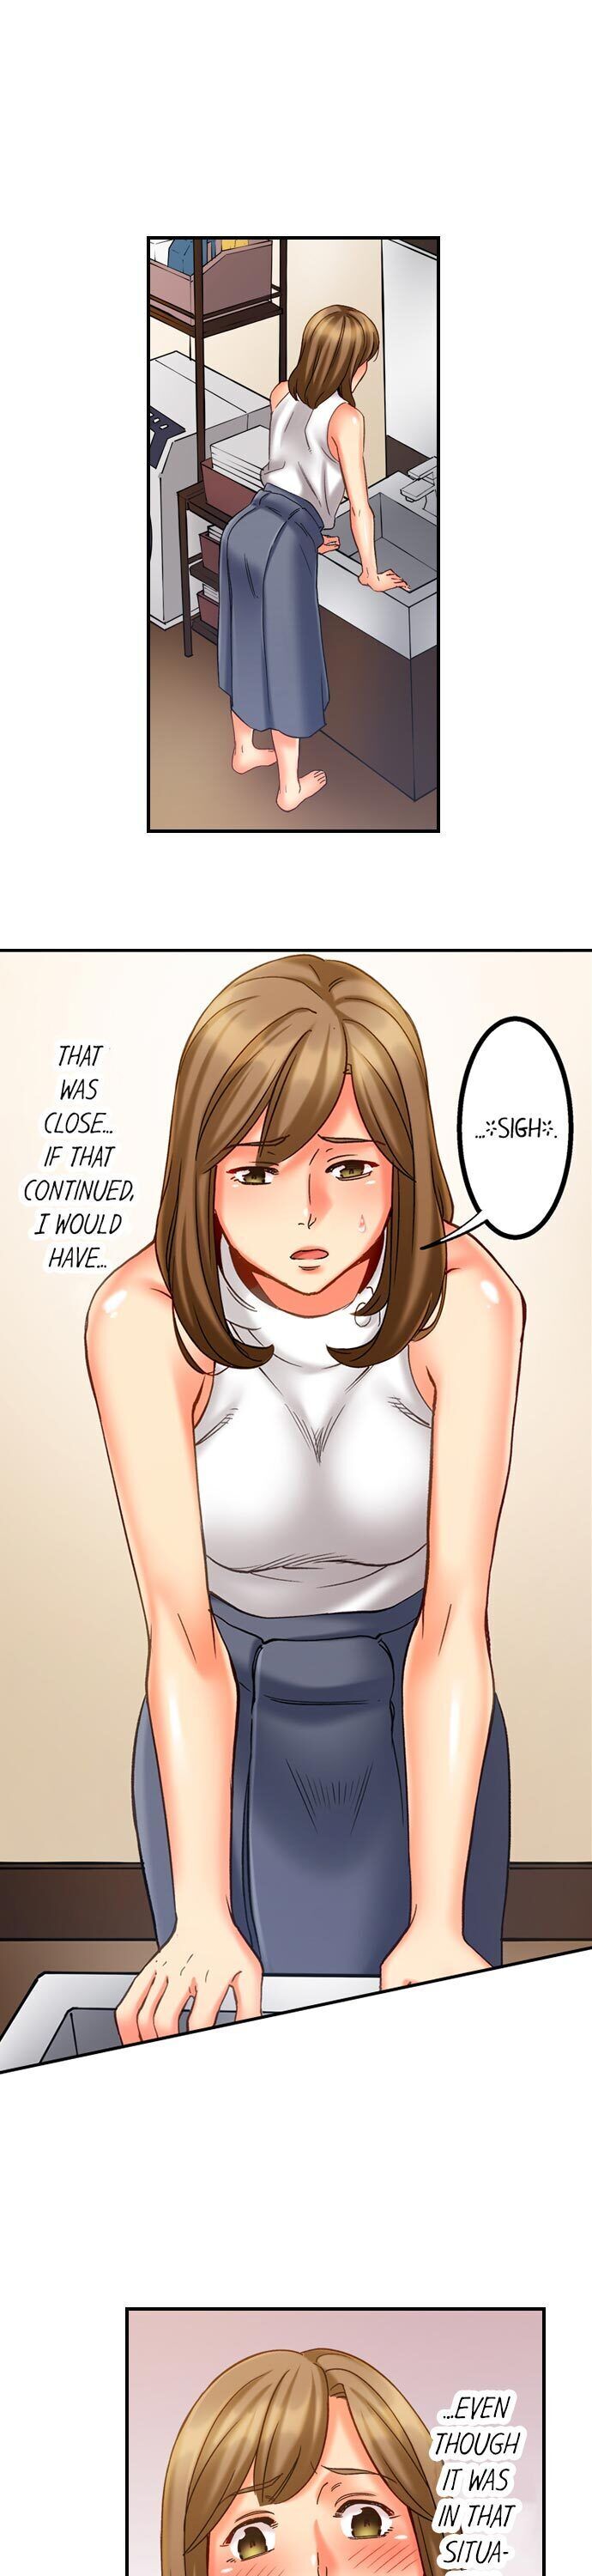 Banging My Ex’s Daughter - Chapter 14 Page 4